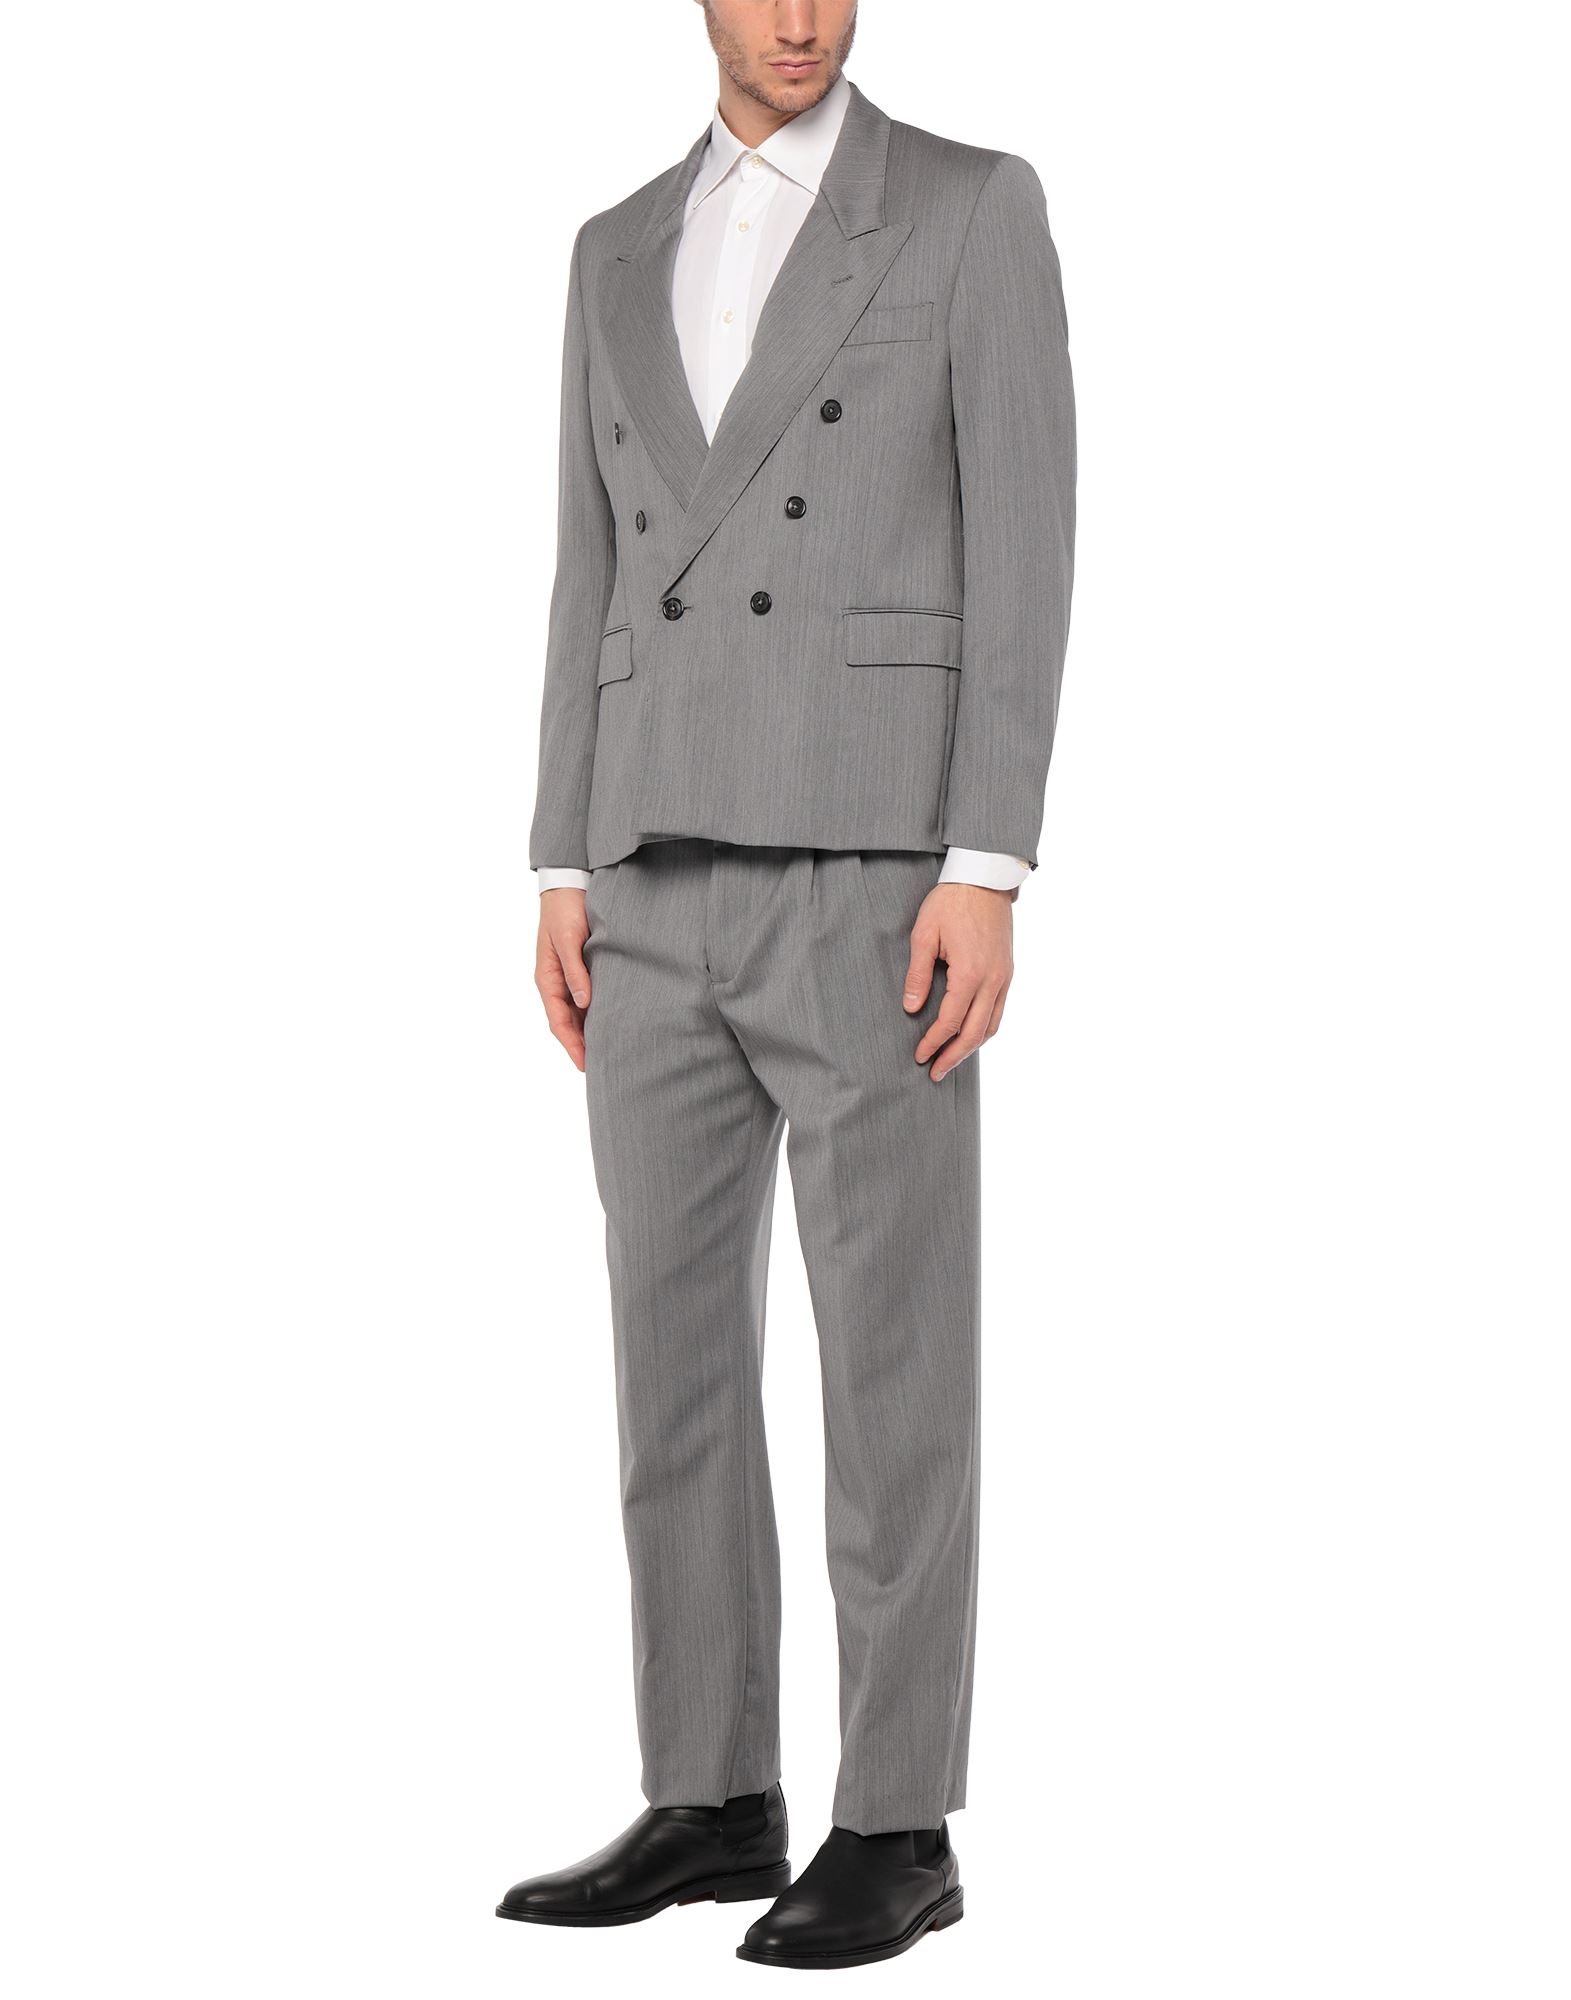 Mauro Grifoni Suits In Grey